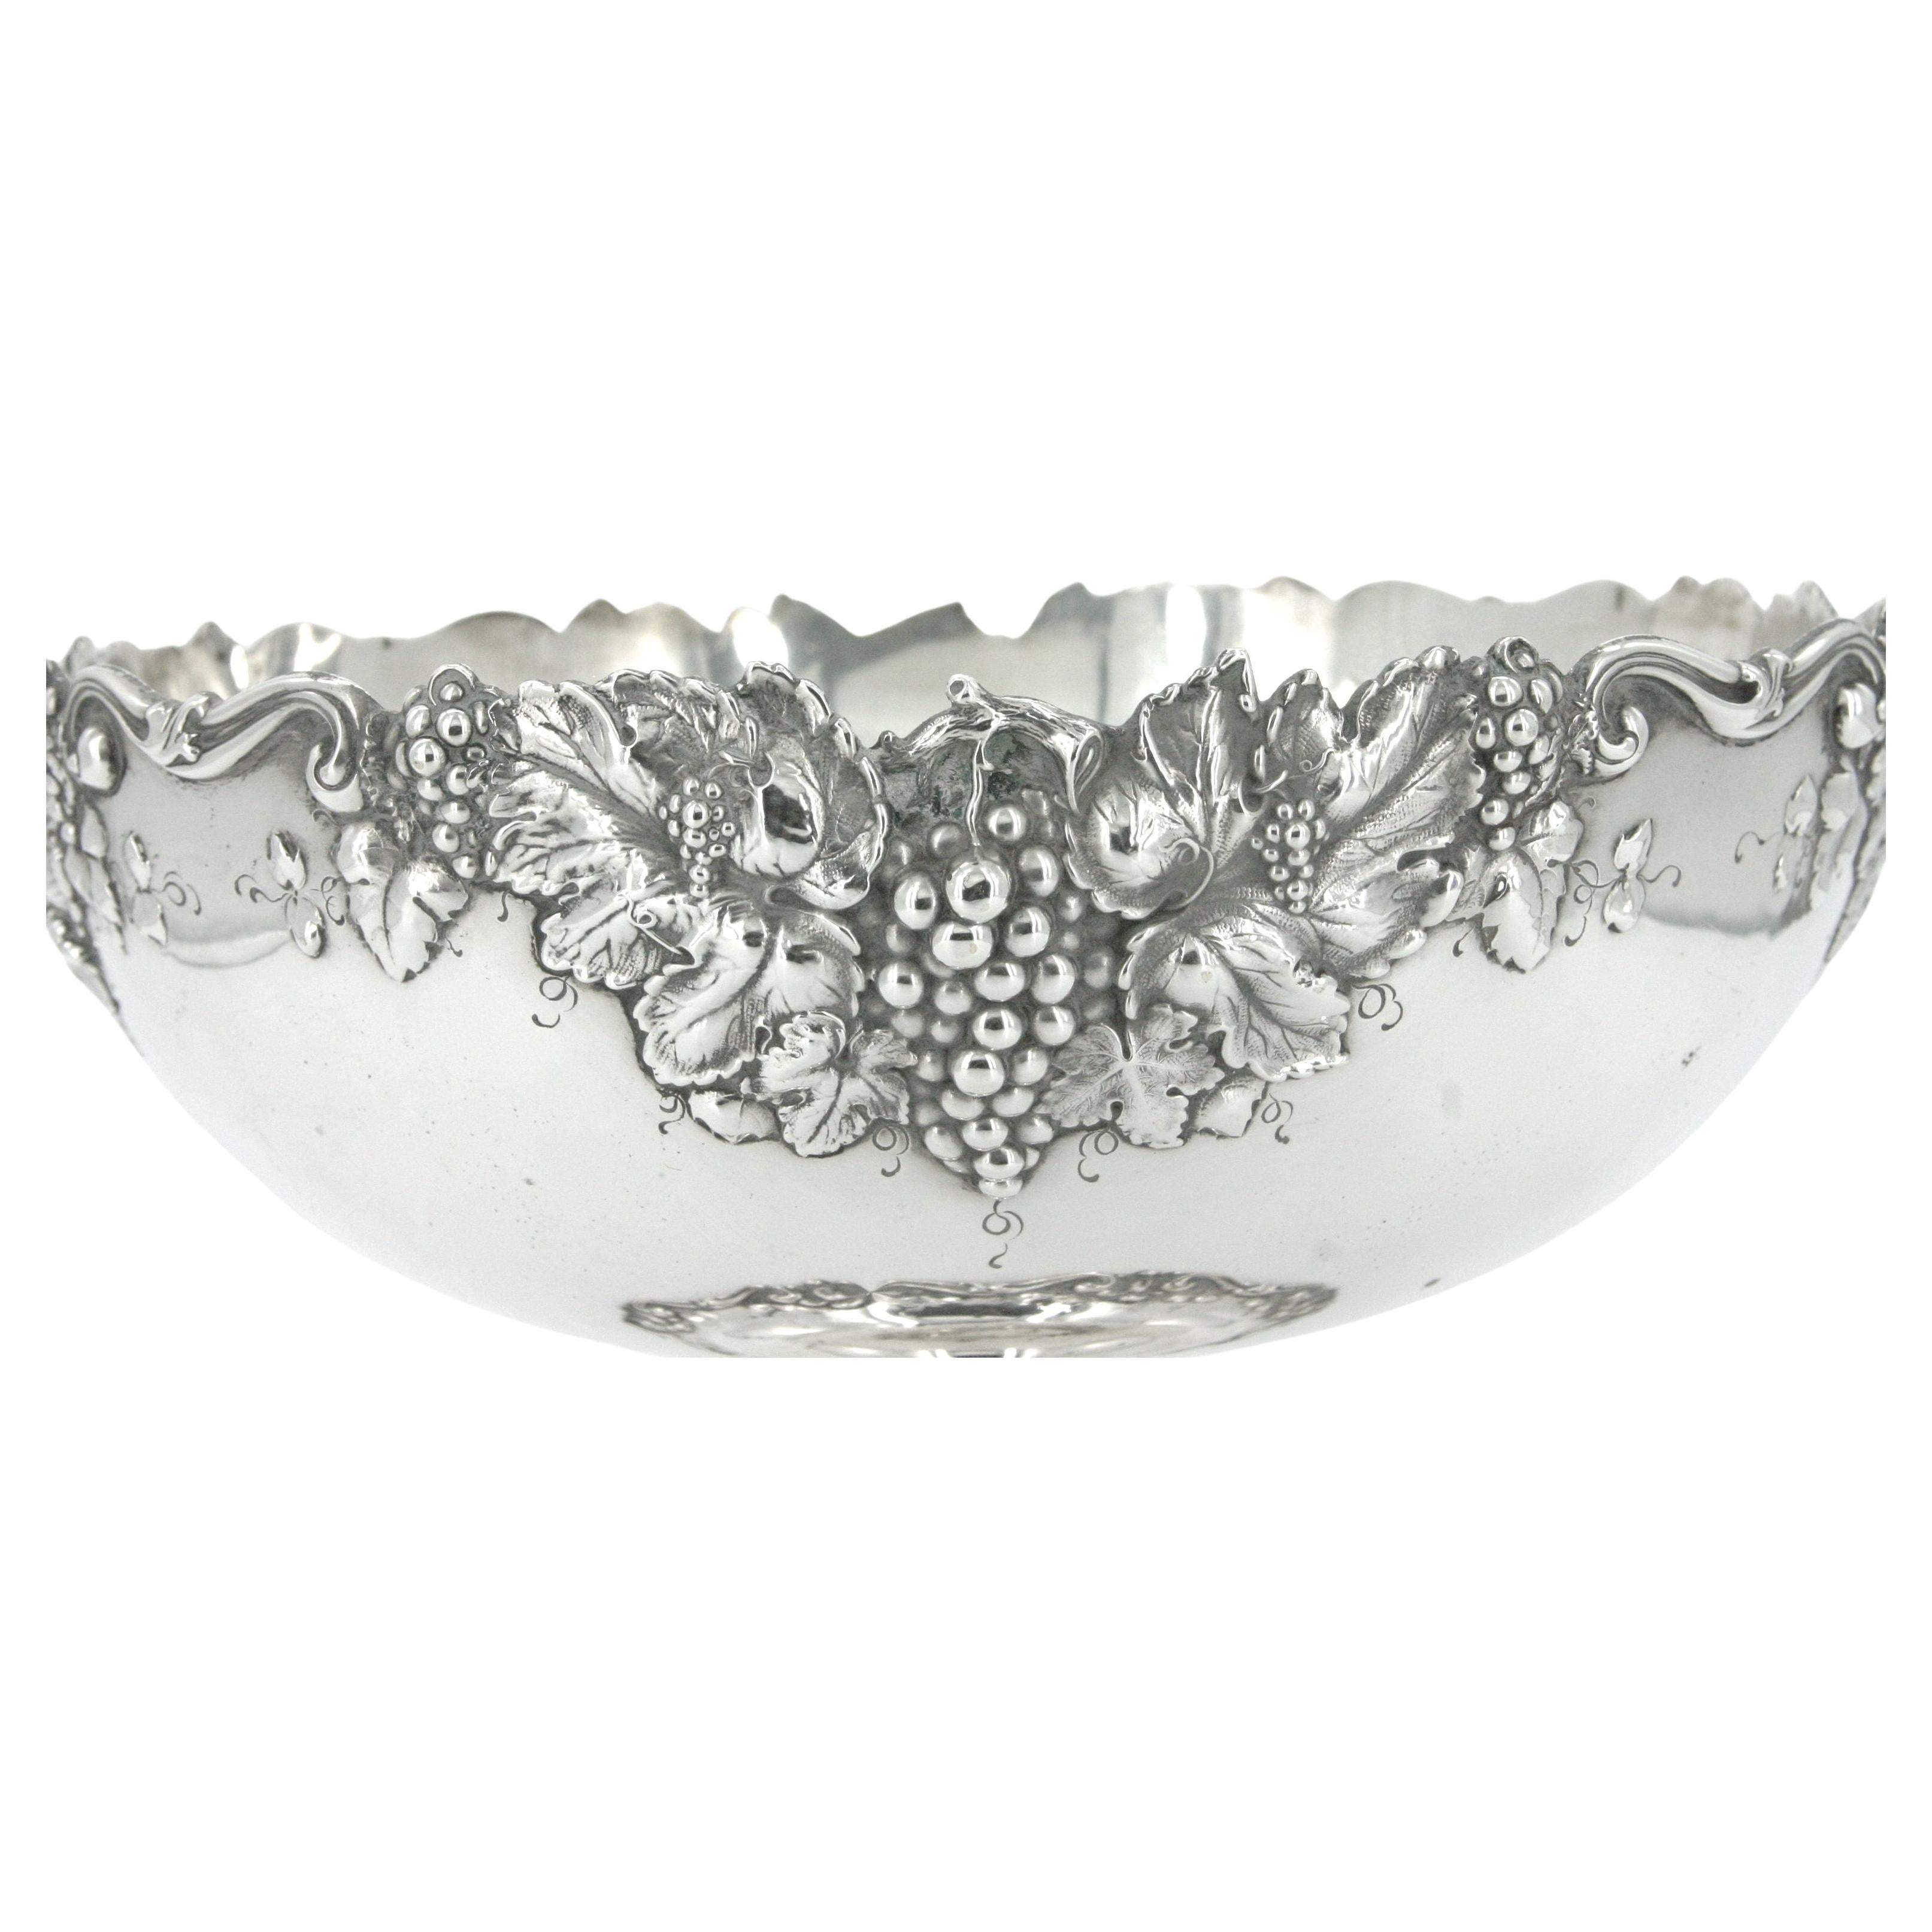 Mid-19th Century Large Sterling Silver Decorative Footed Bowl